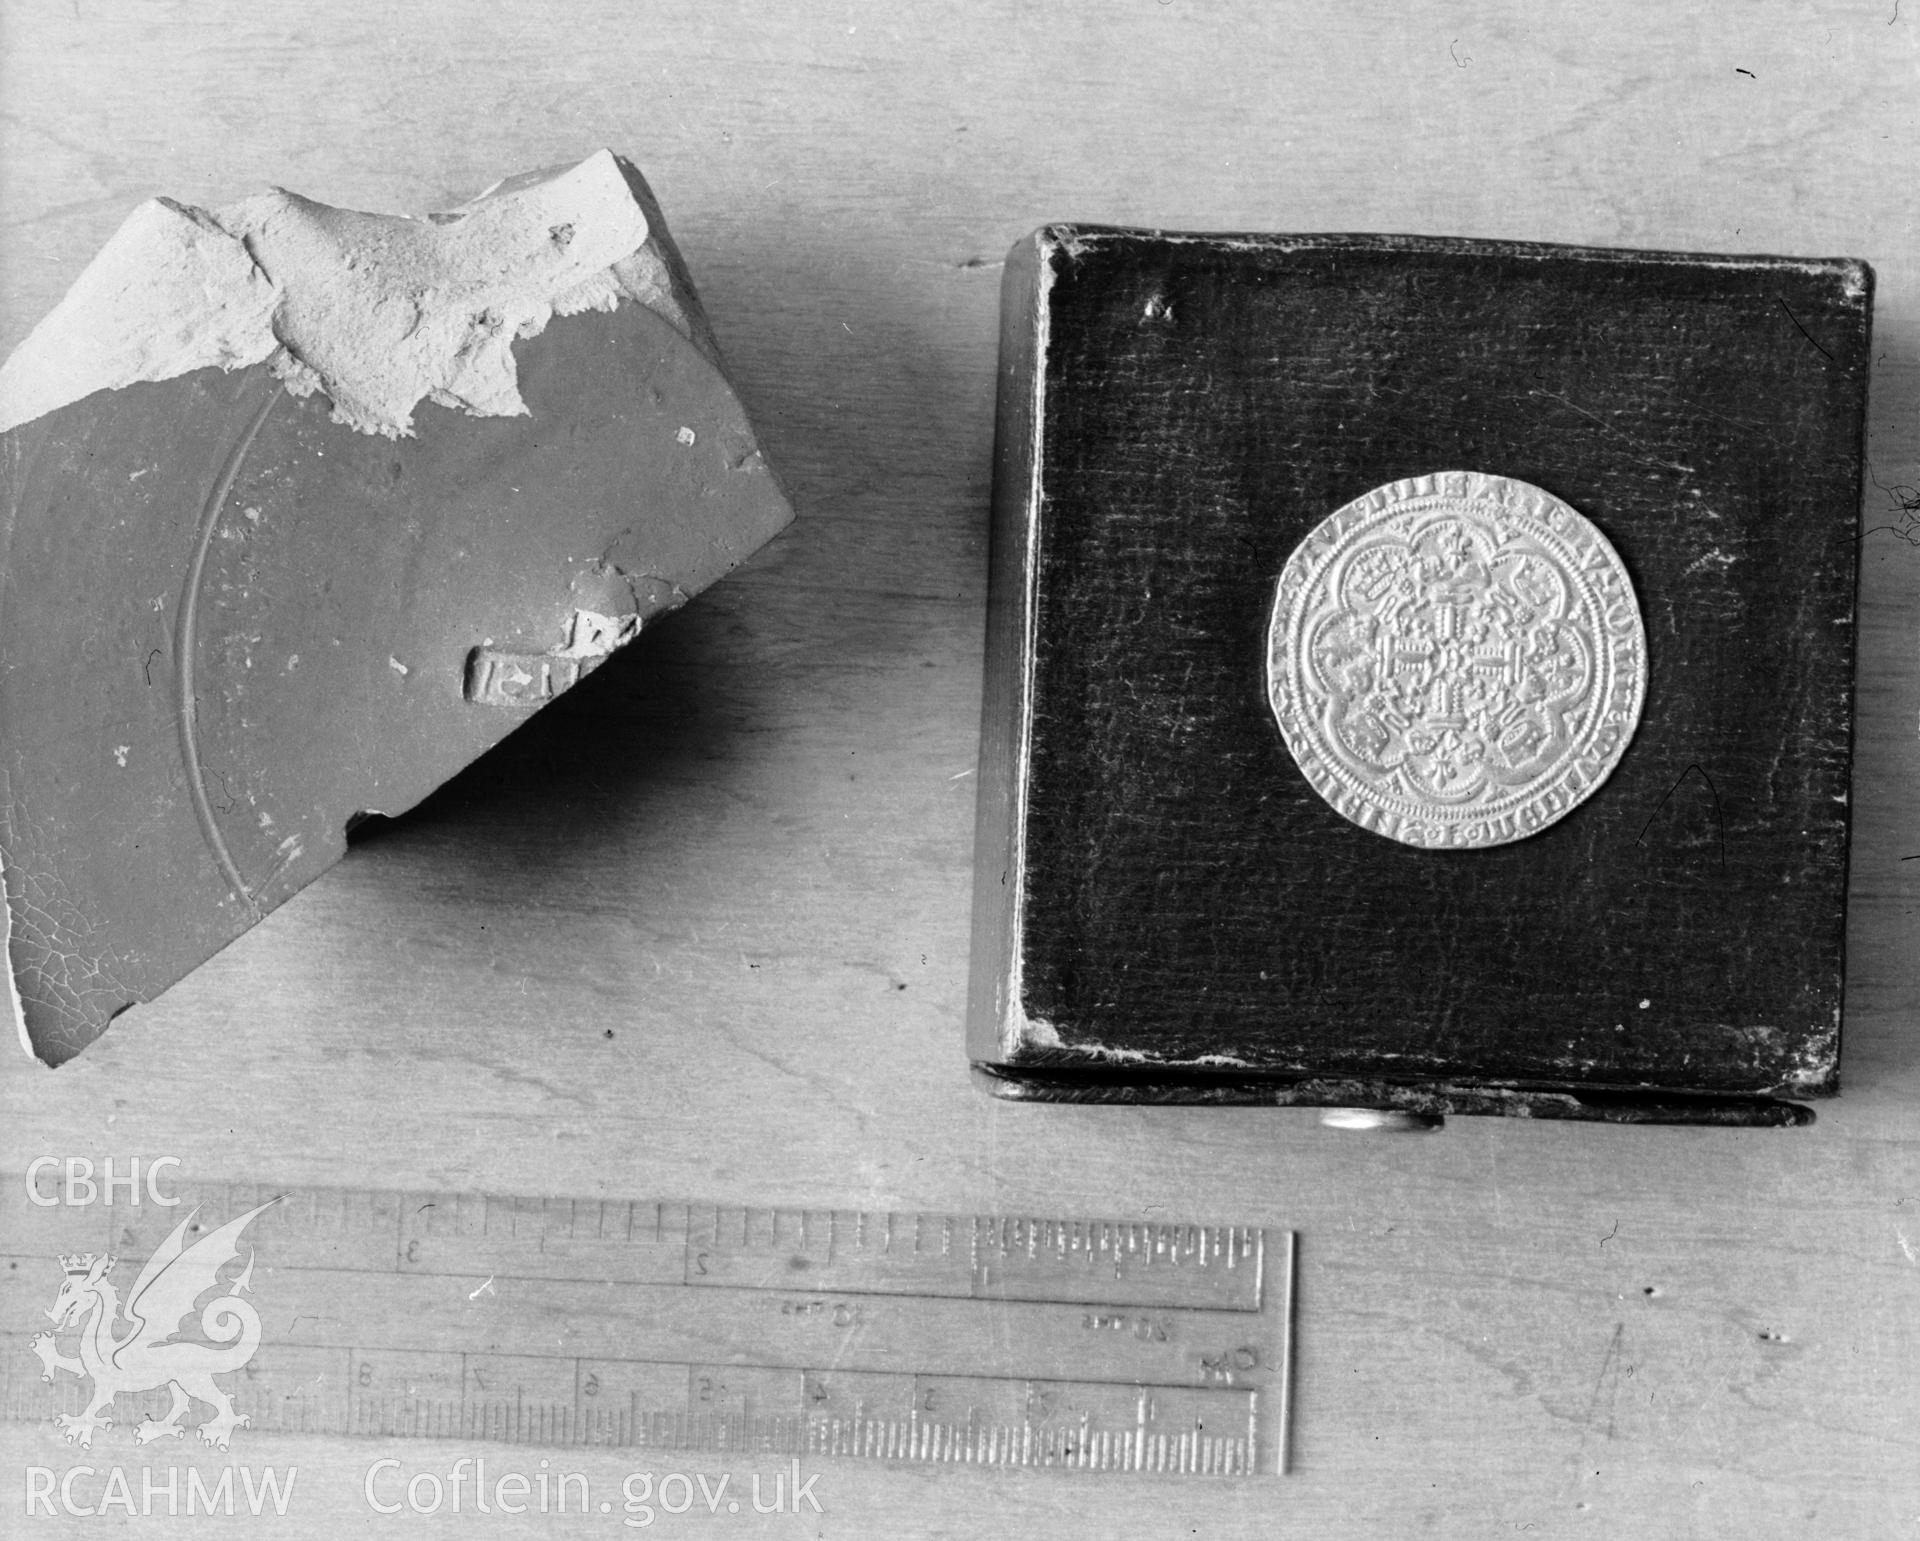 View of coin and pottery fragment from Caerhun Hall, Caerhun taken in 15.07.1950.